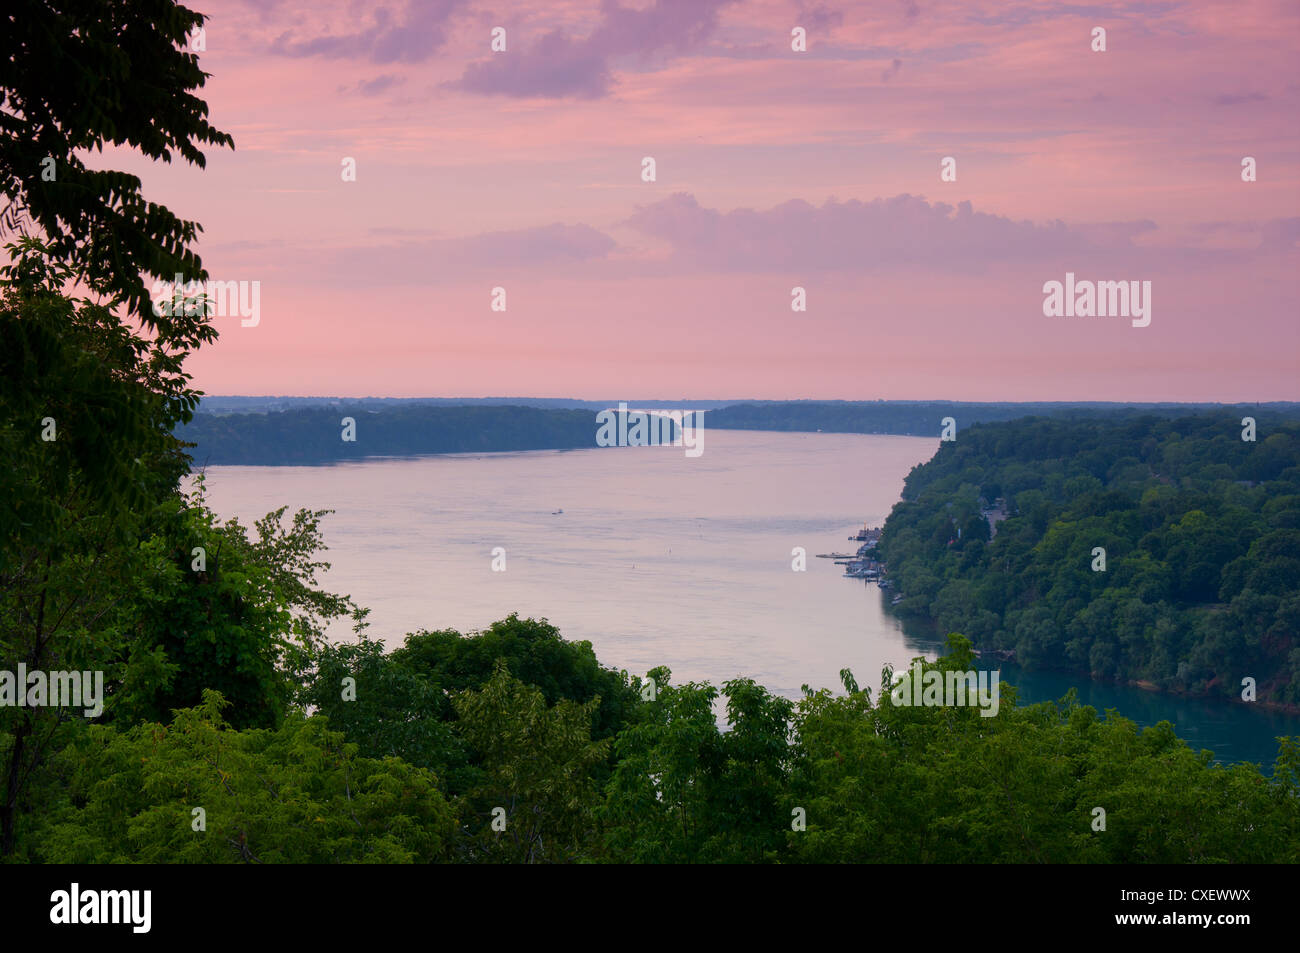 Niagara River gorge along Niagara Escarpment viewed from atop bluff at Queenston Heights Park in Canada Stock Photo